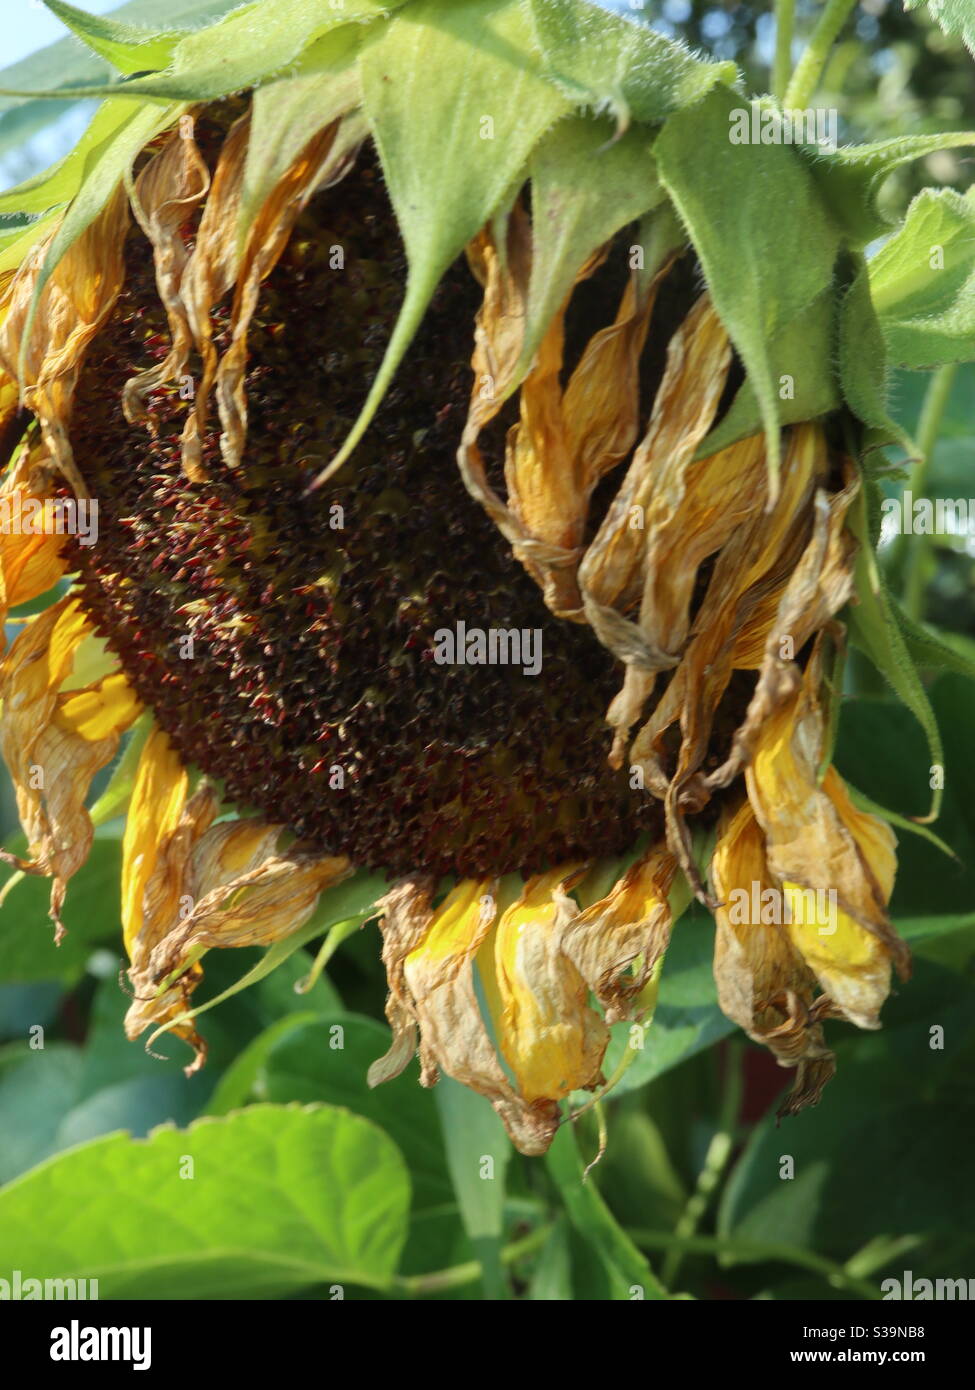 Wilting Common Sunflower at its end Stock Photo